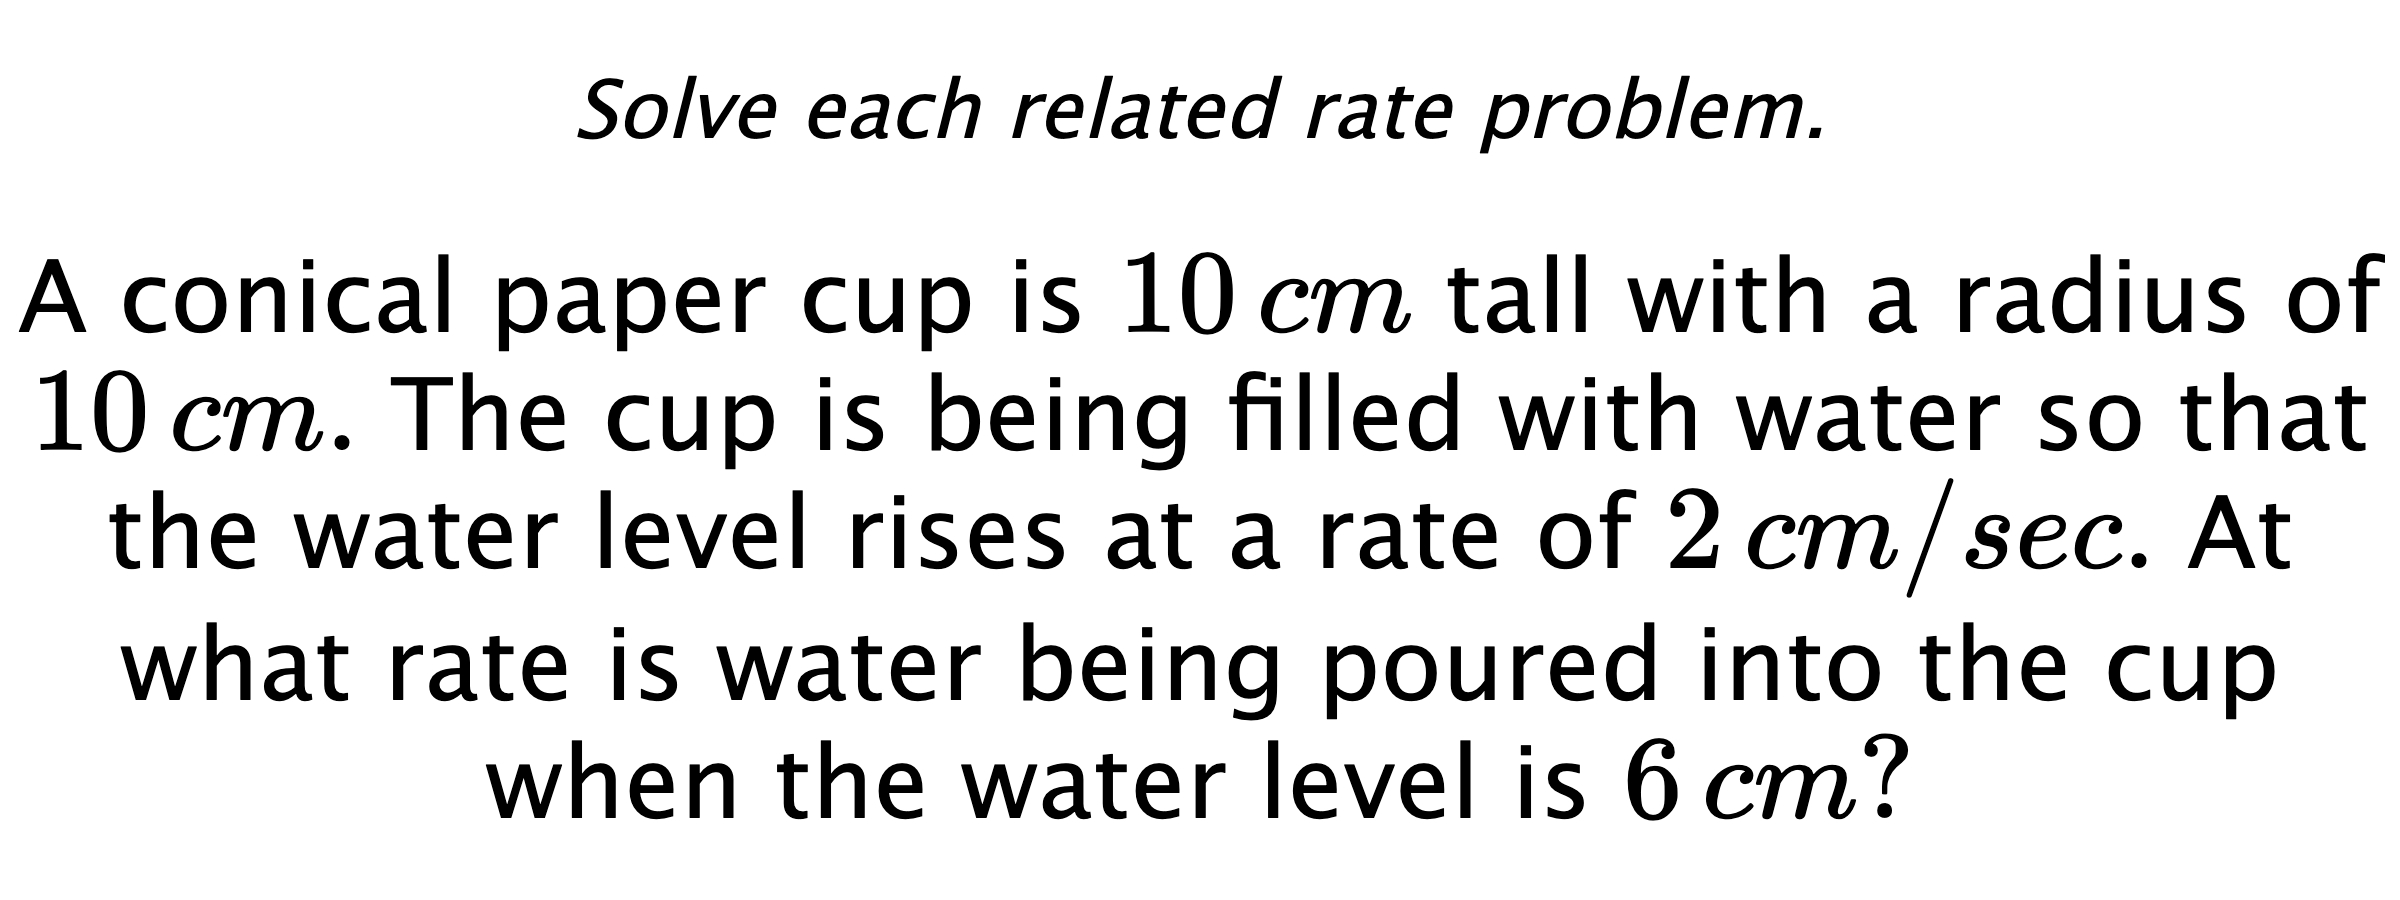 Solve each related rate problem. A conical paper cup is $10\,cm$ tall with a radius of $10\,cm.$ The cup is being filled with water so that the water level rises at a rate of $2\,cm/sec.$ At what rate is water being poured into the cup when the water level is $6\,cm?$